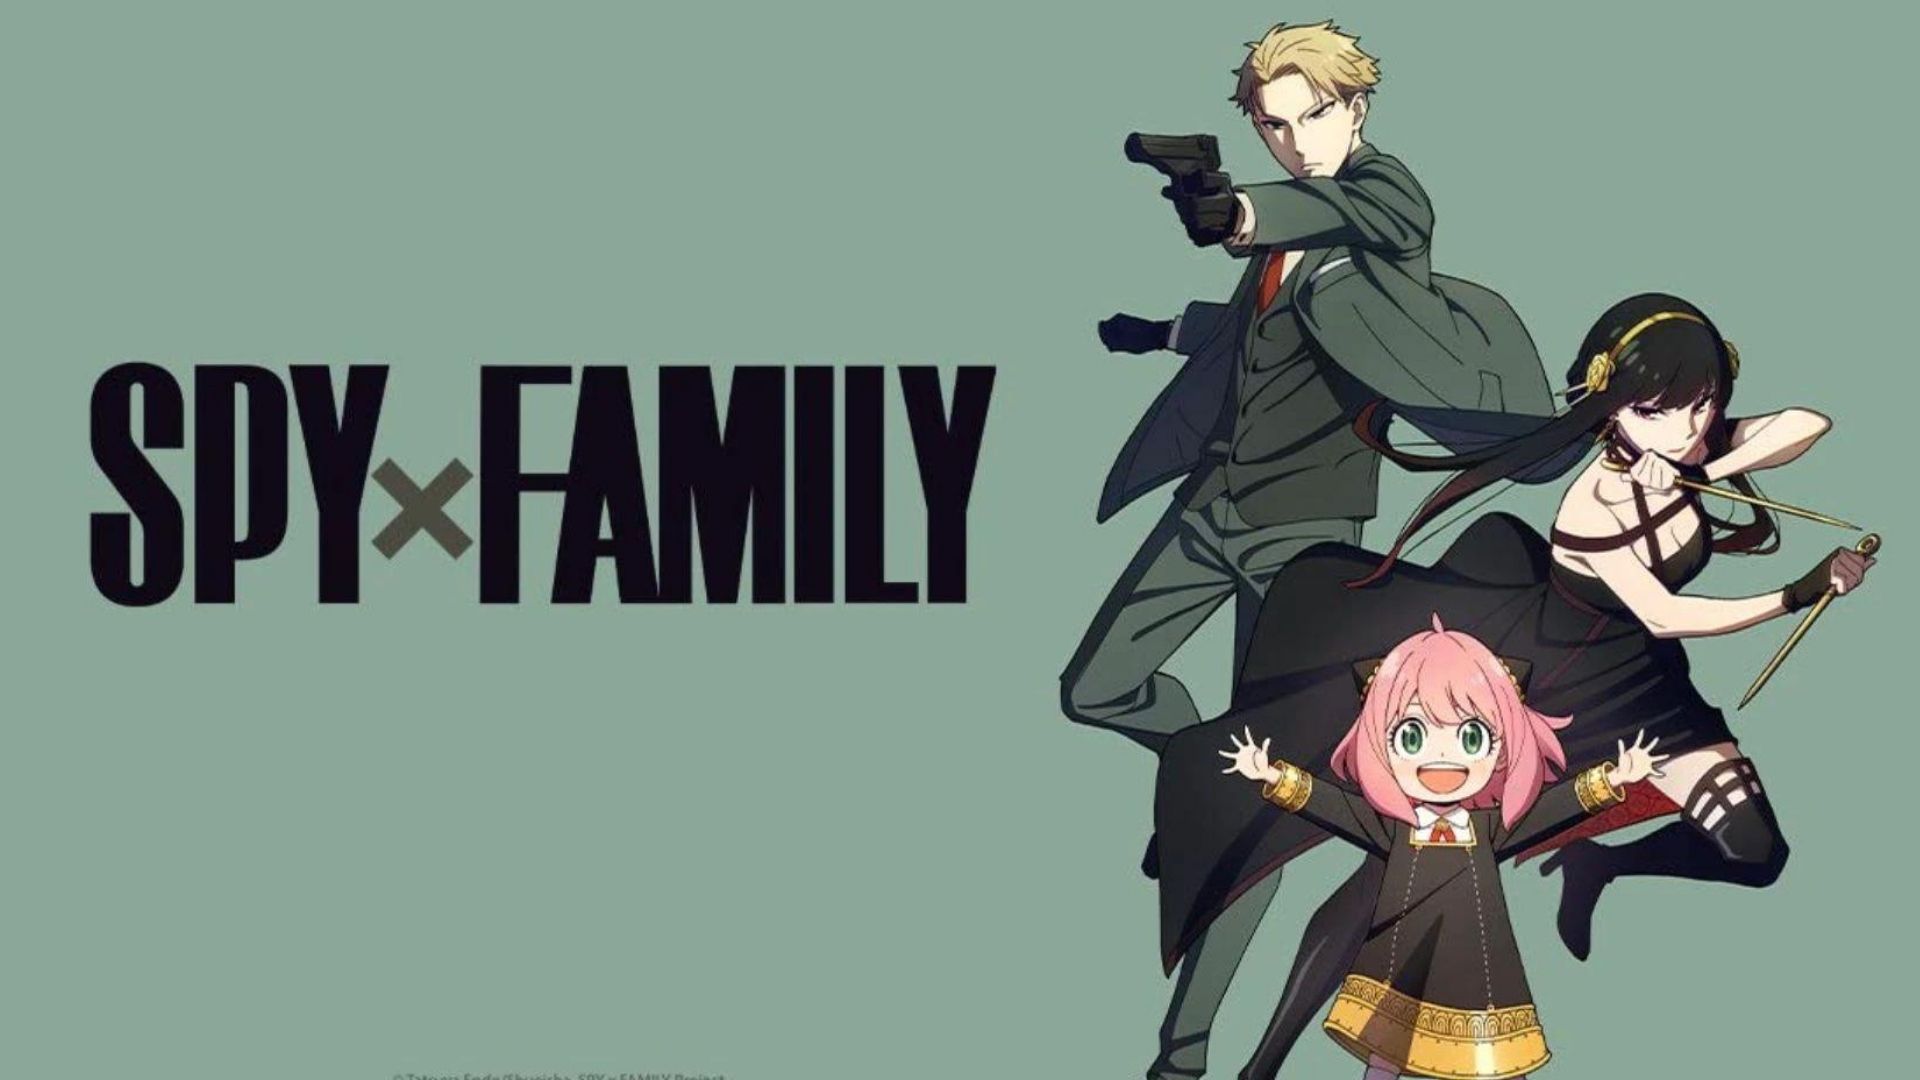 Buddy Daddies' vs. 'Spy x Family': Which Anime is Right for You?